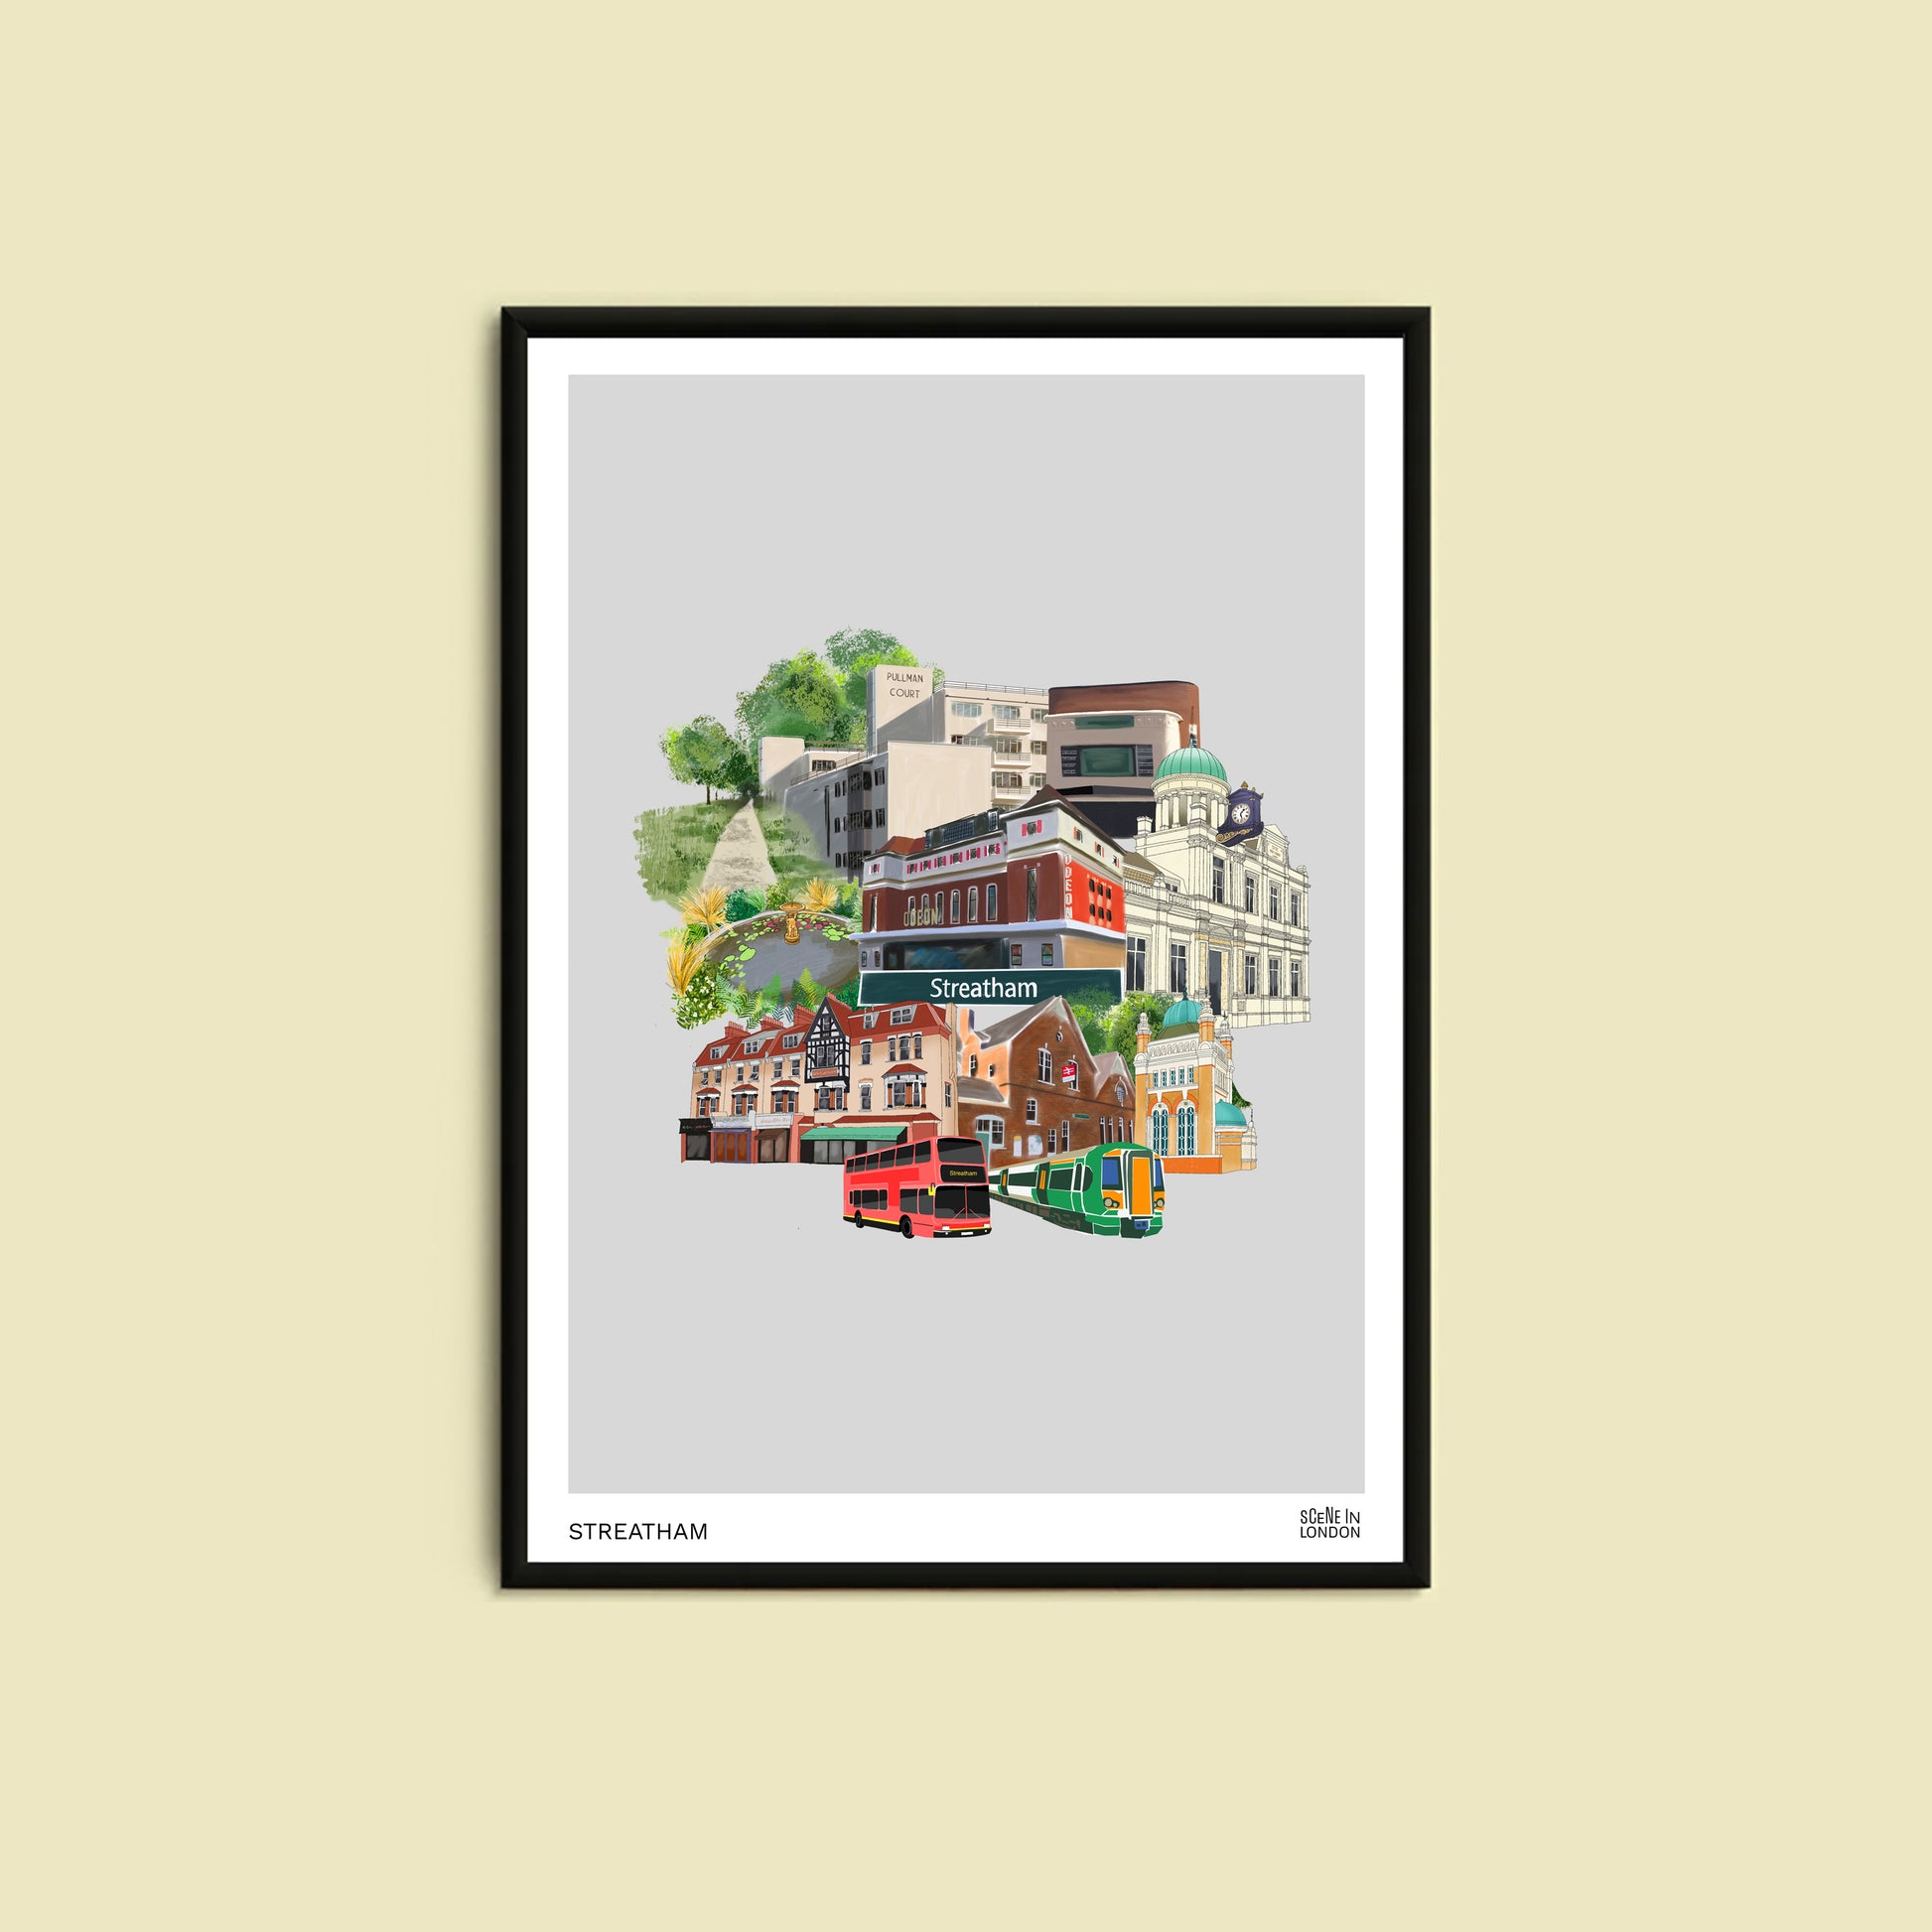 Streatham art print featuring places in Streatham, London